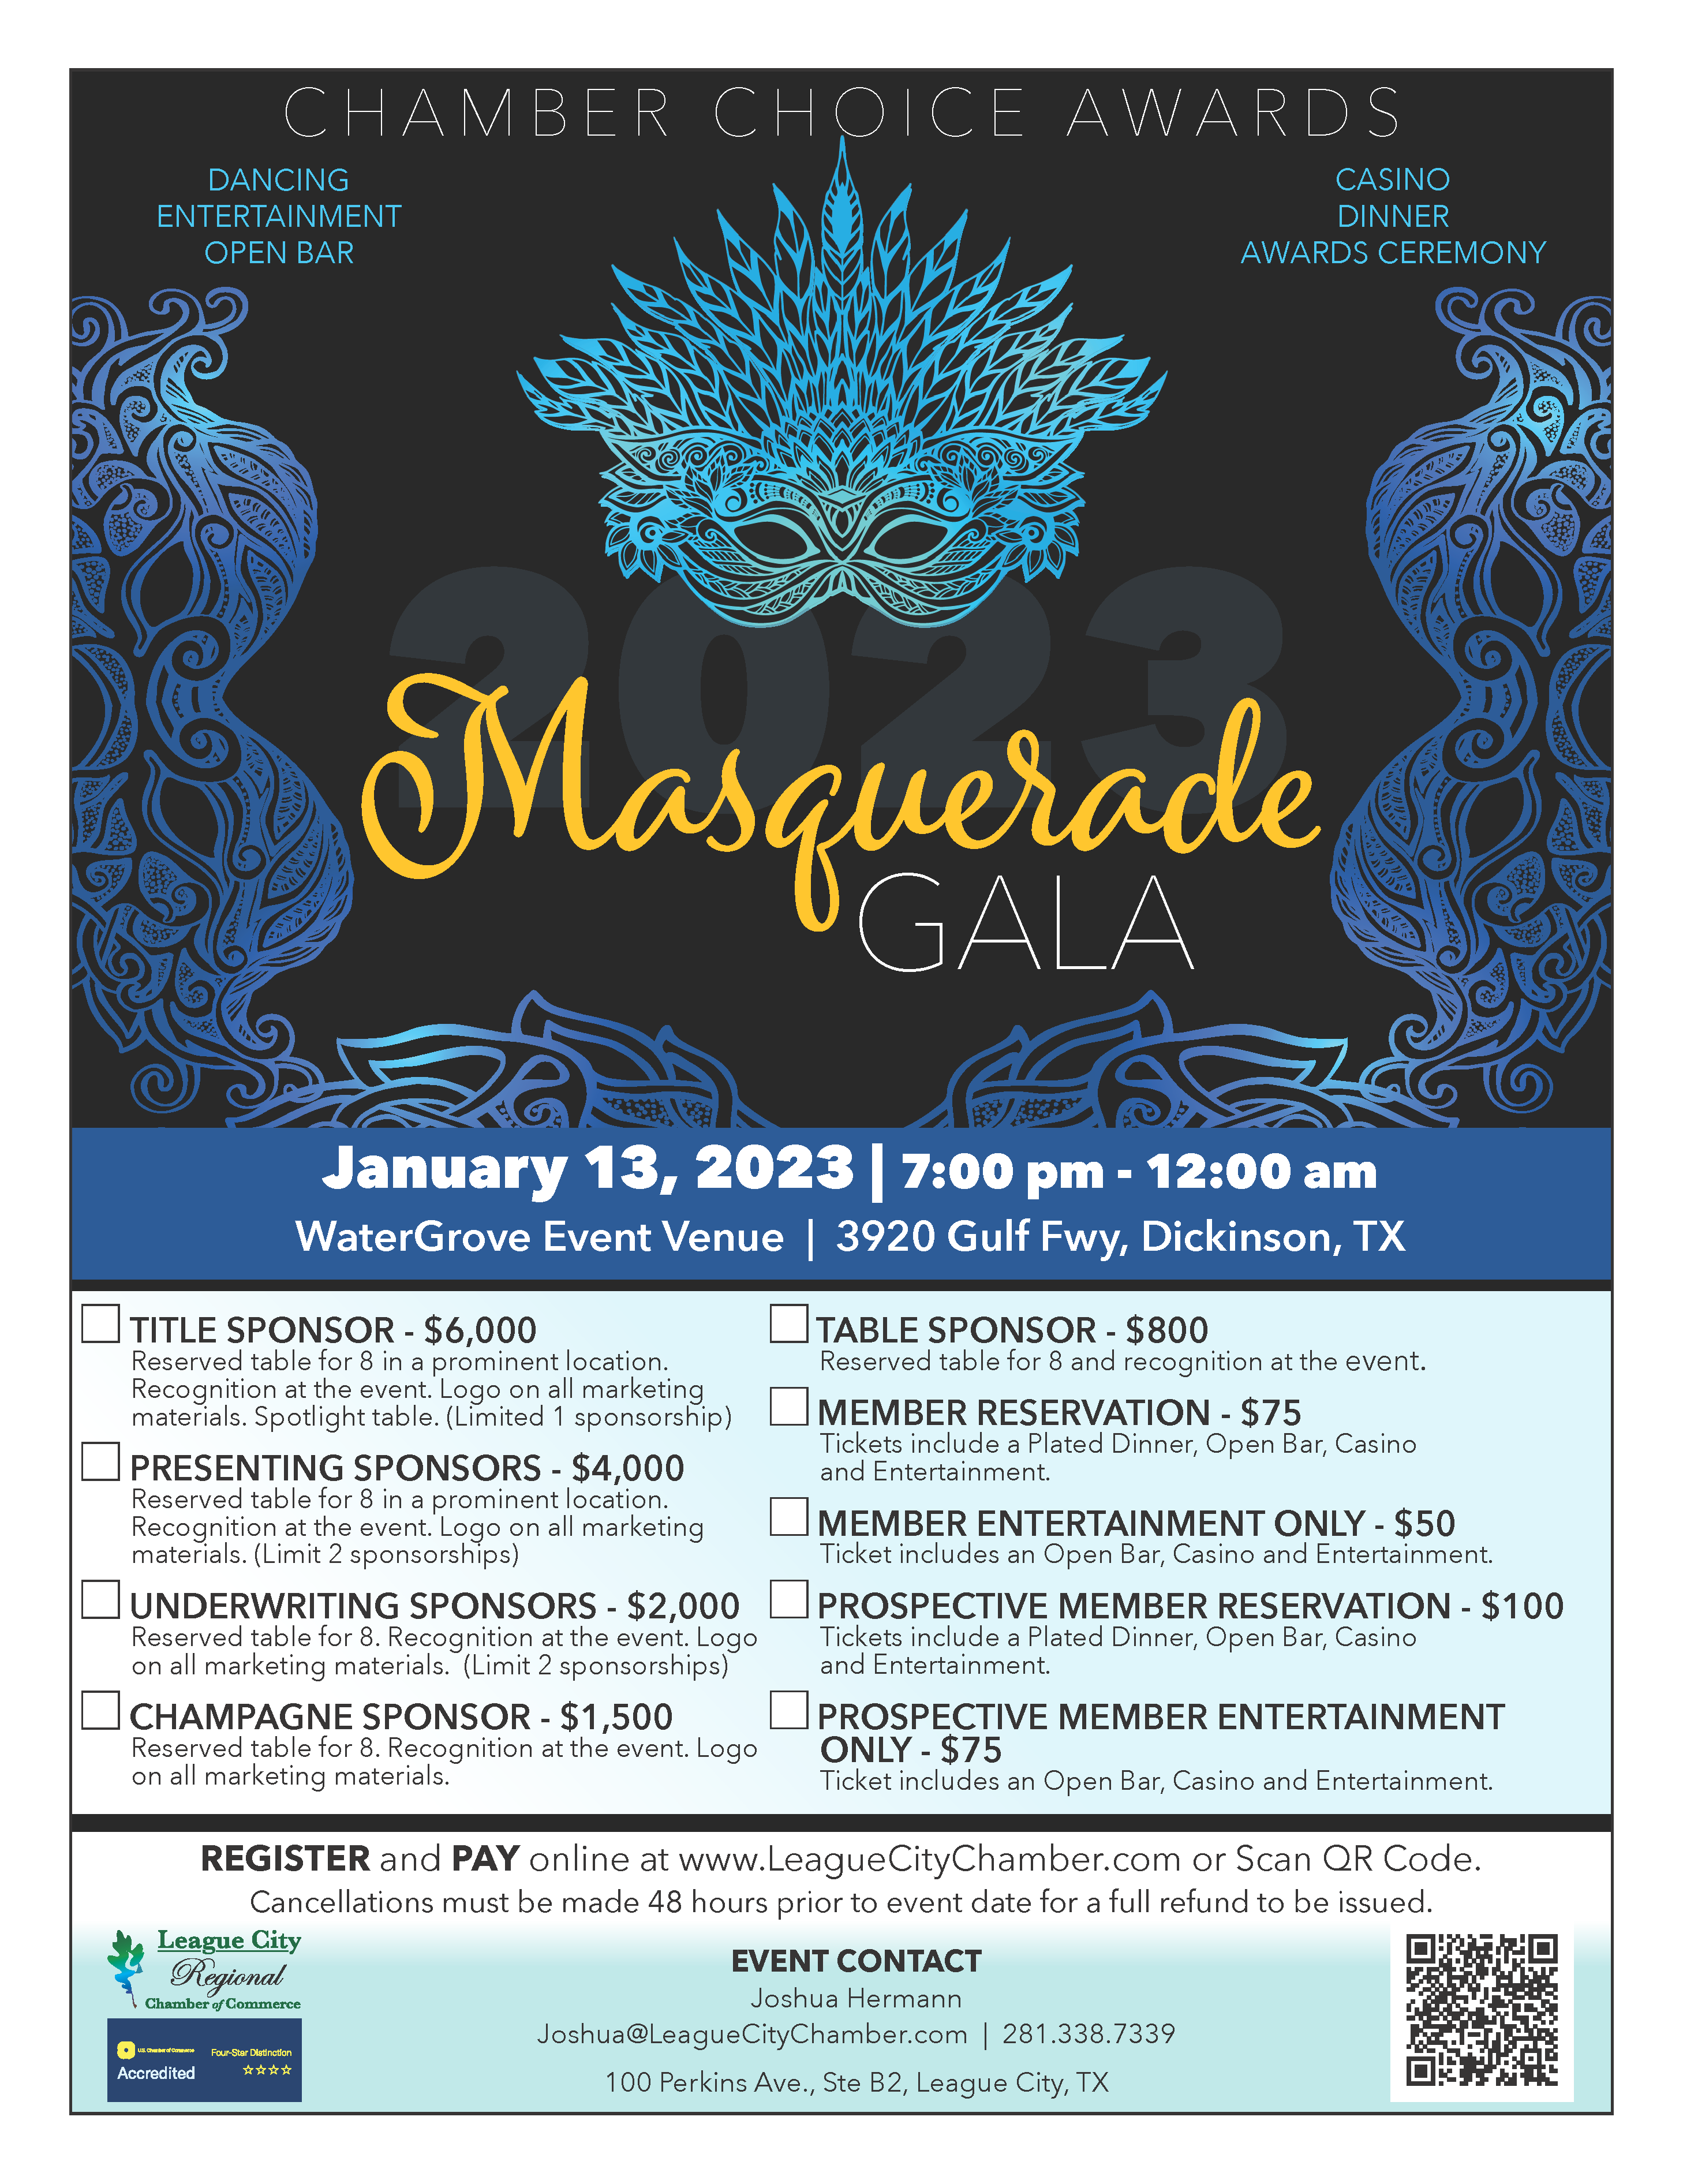 PRESS RELEASE: League City Regional Chamber of Commerce to have the first Masquerade Award Gala!